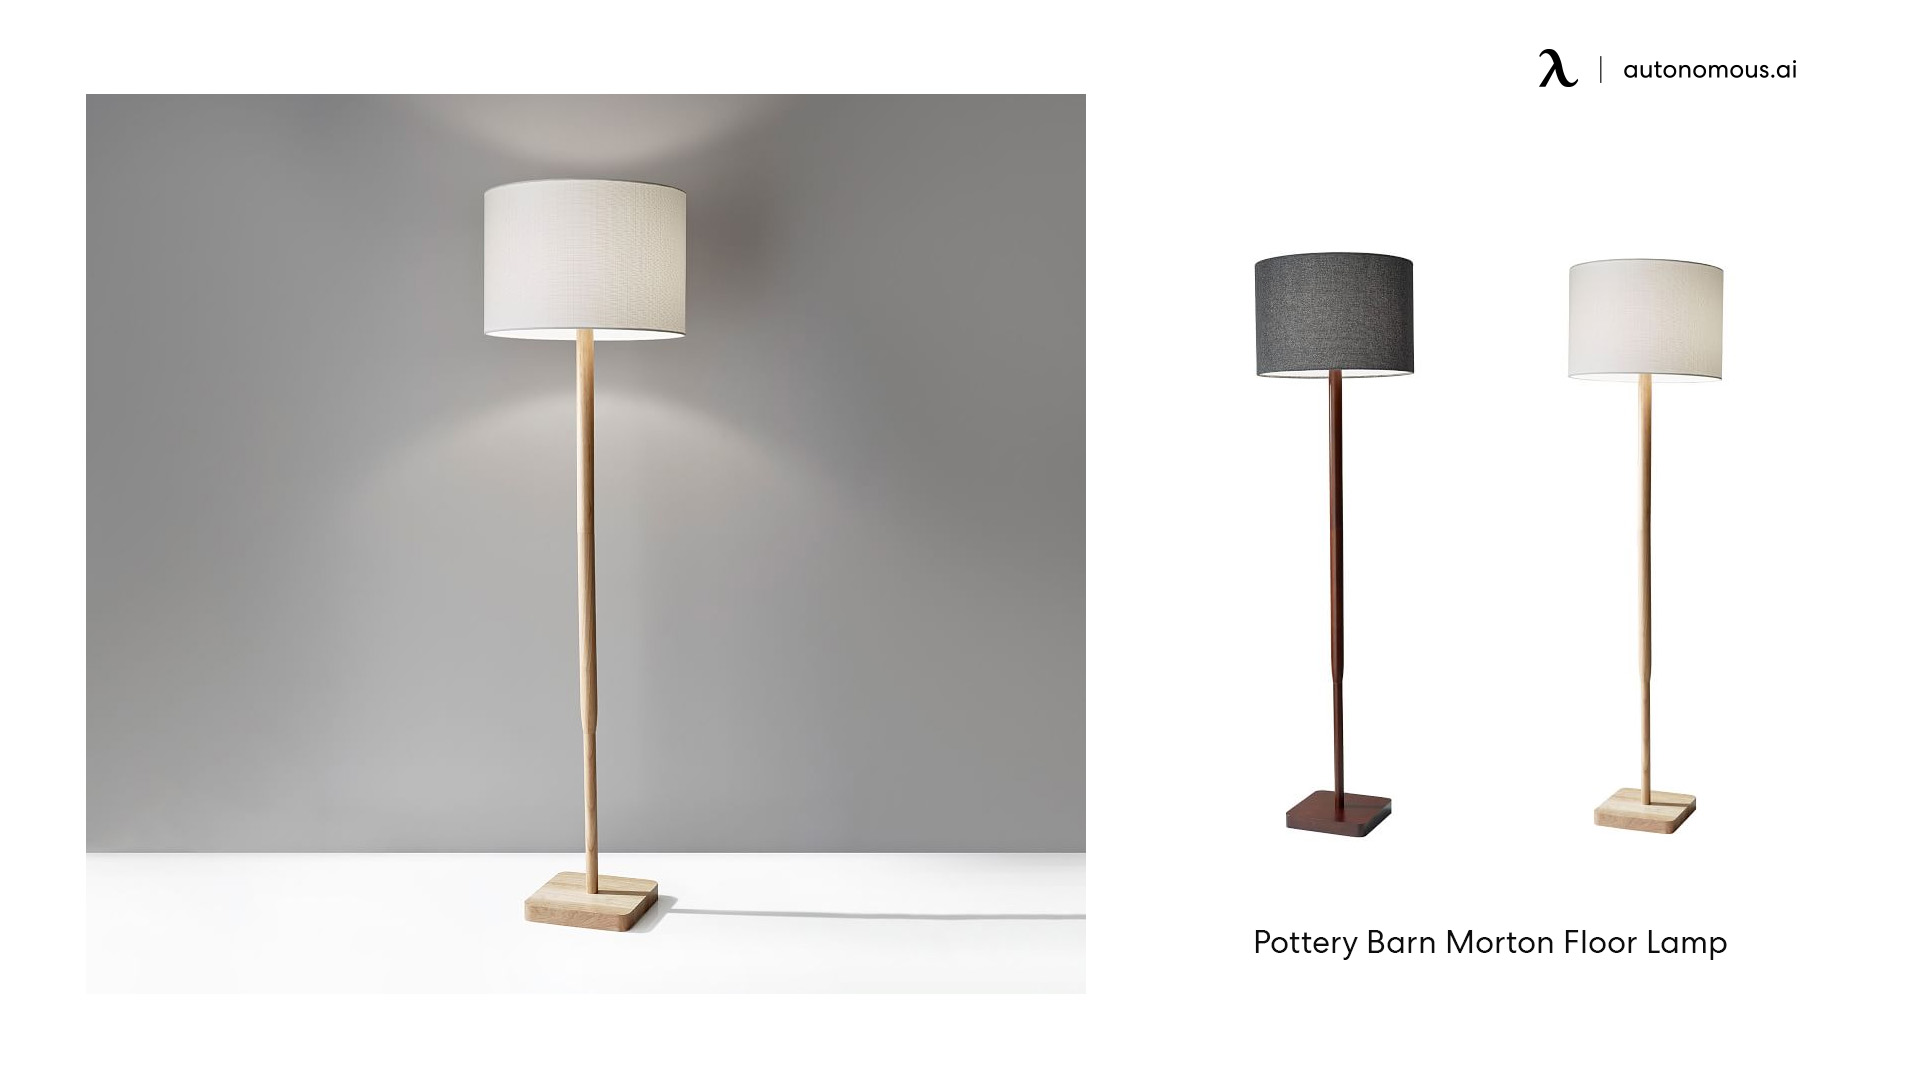 Modern Floor Lamps For Interior Design, High Quality Contemporary Floor Lamps